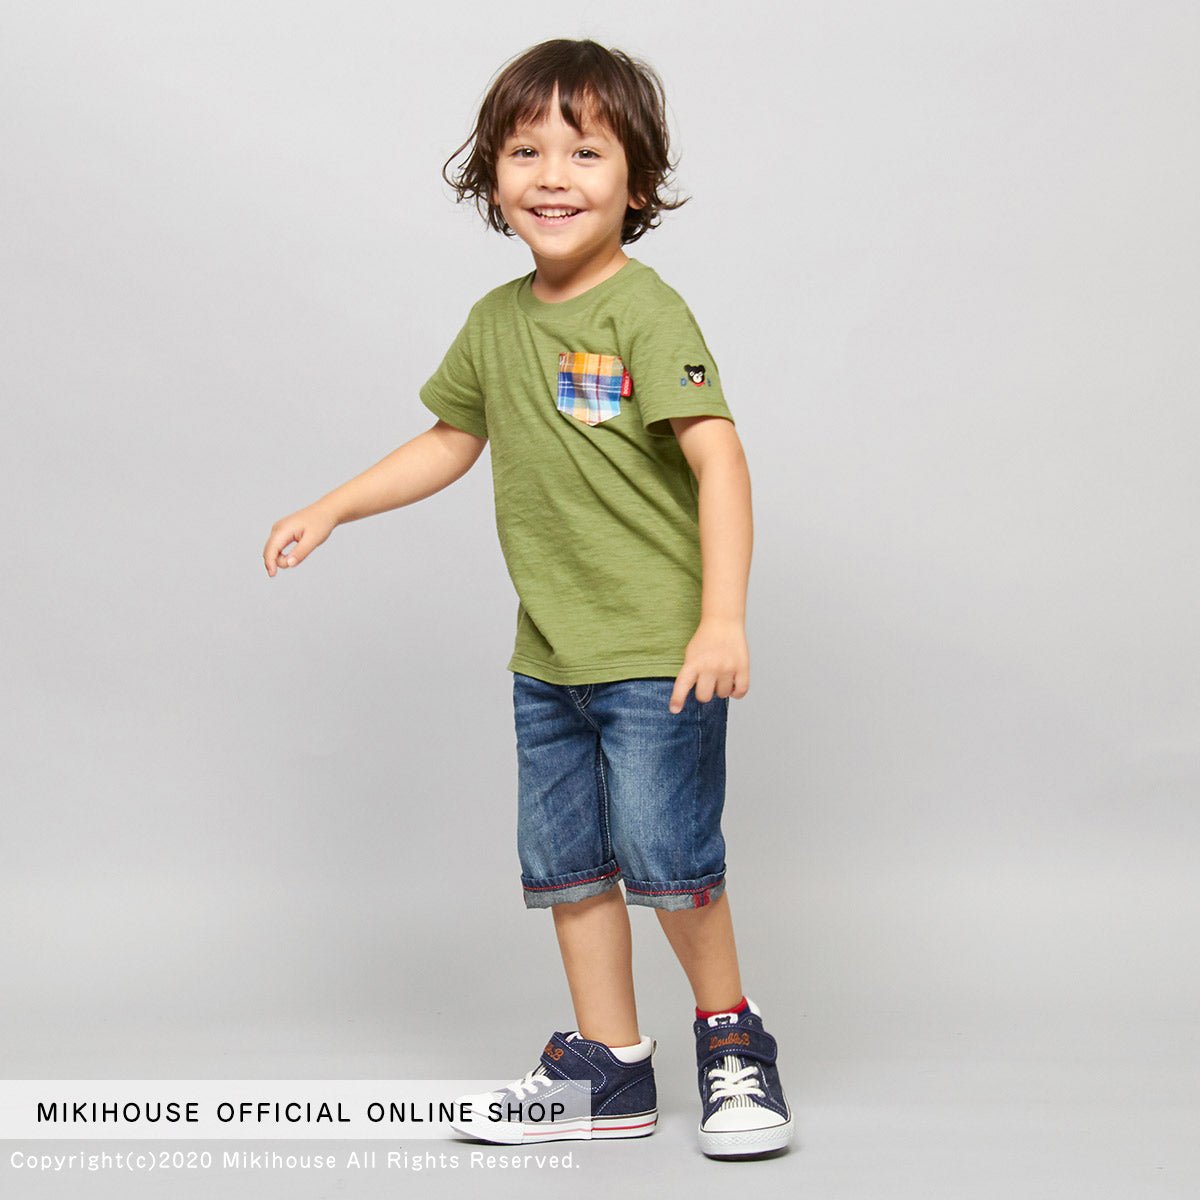 DOUBLE_B High Top Shoes for Kids - Street Style - 63-9401-261-33-16